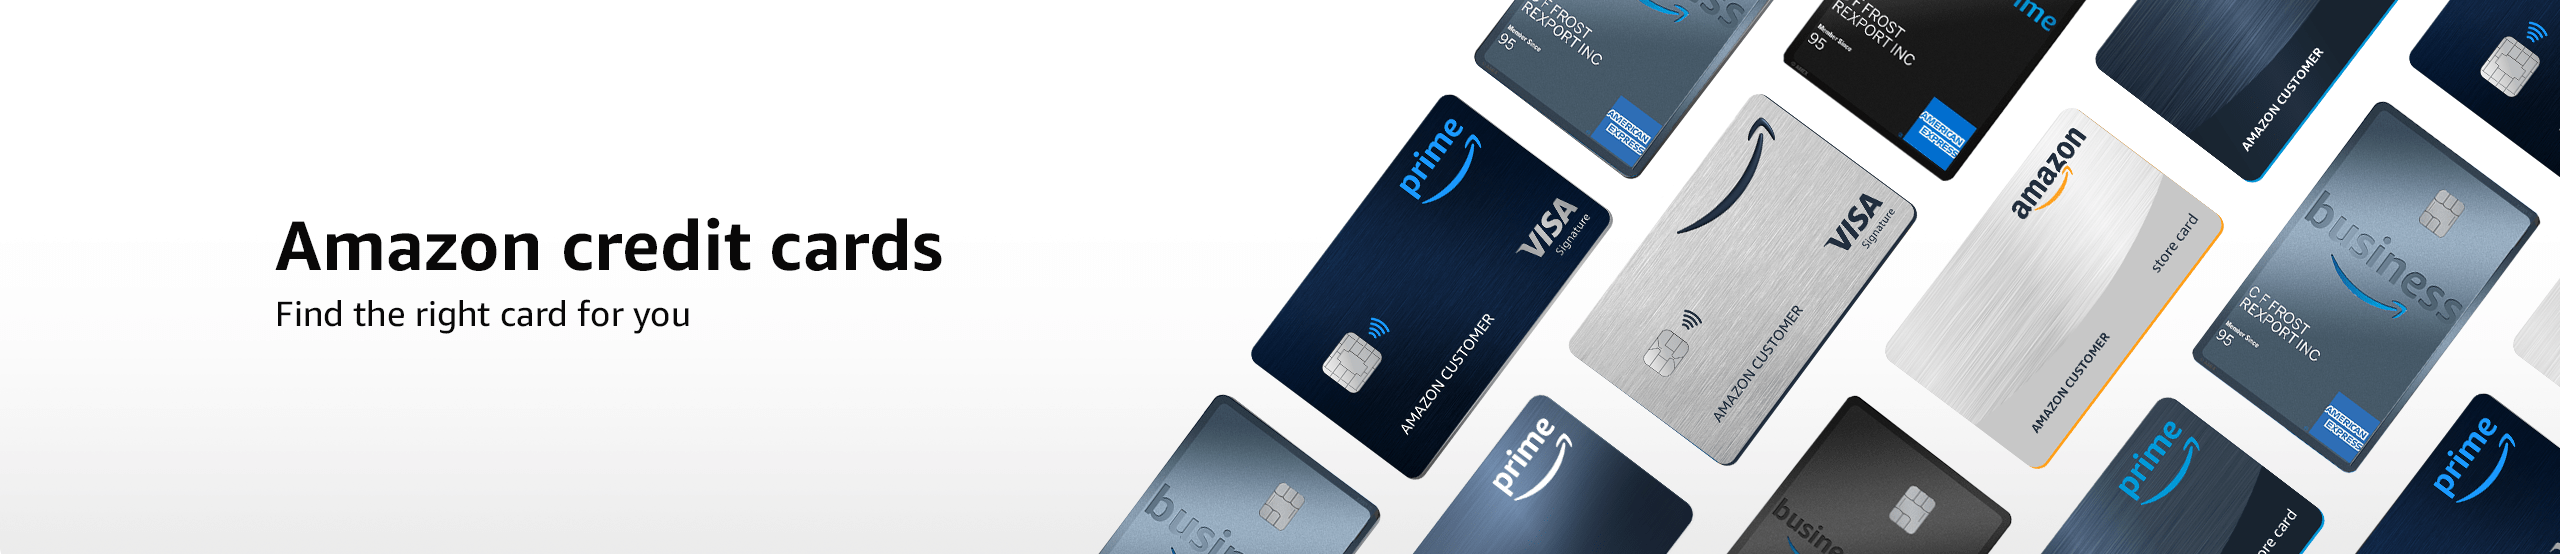 Amazon credit cards, find the right card for you